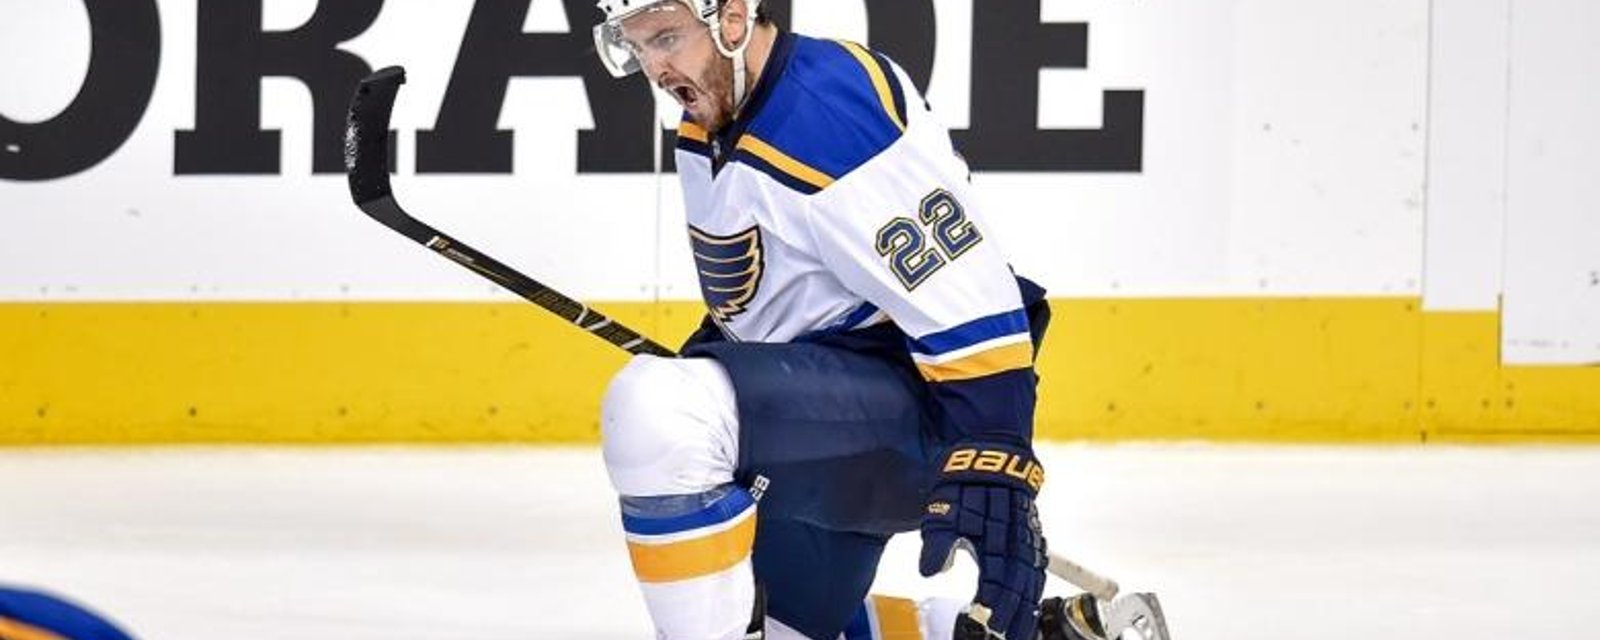 Bruins insider reports two more teams competing with Boston for Shattenkirk.